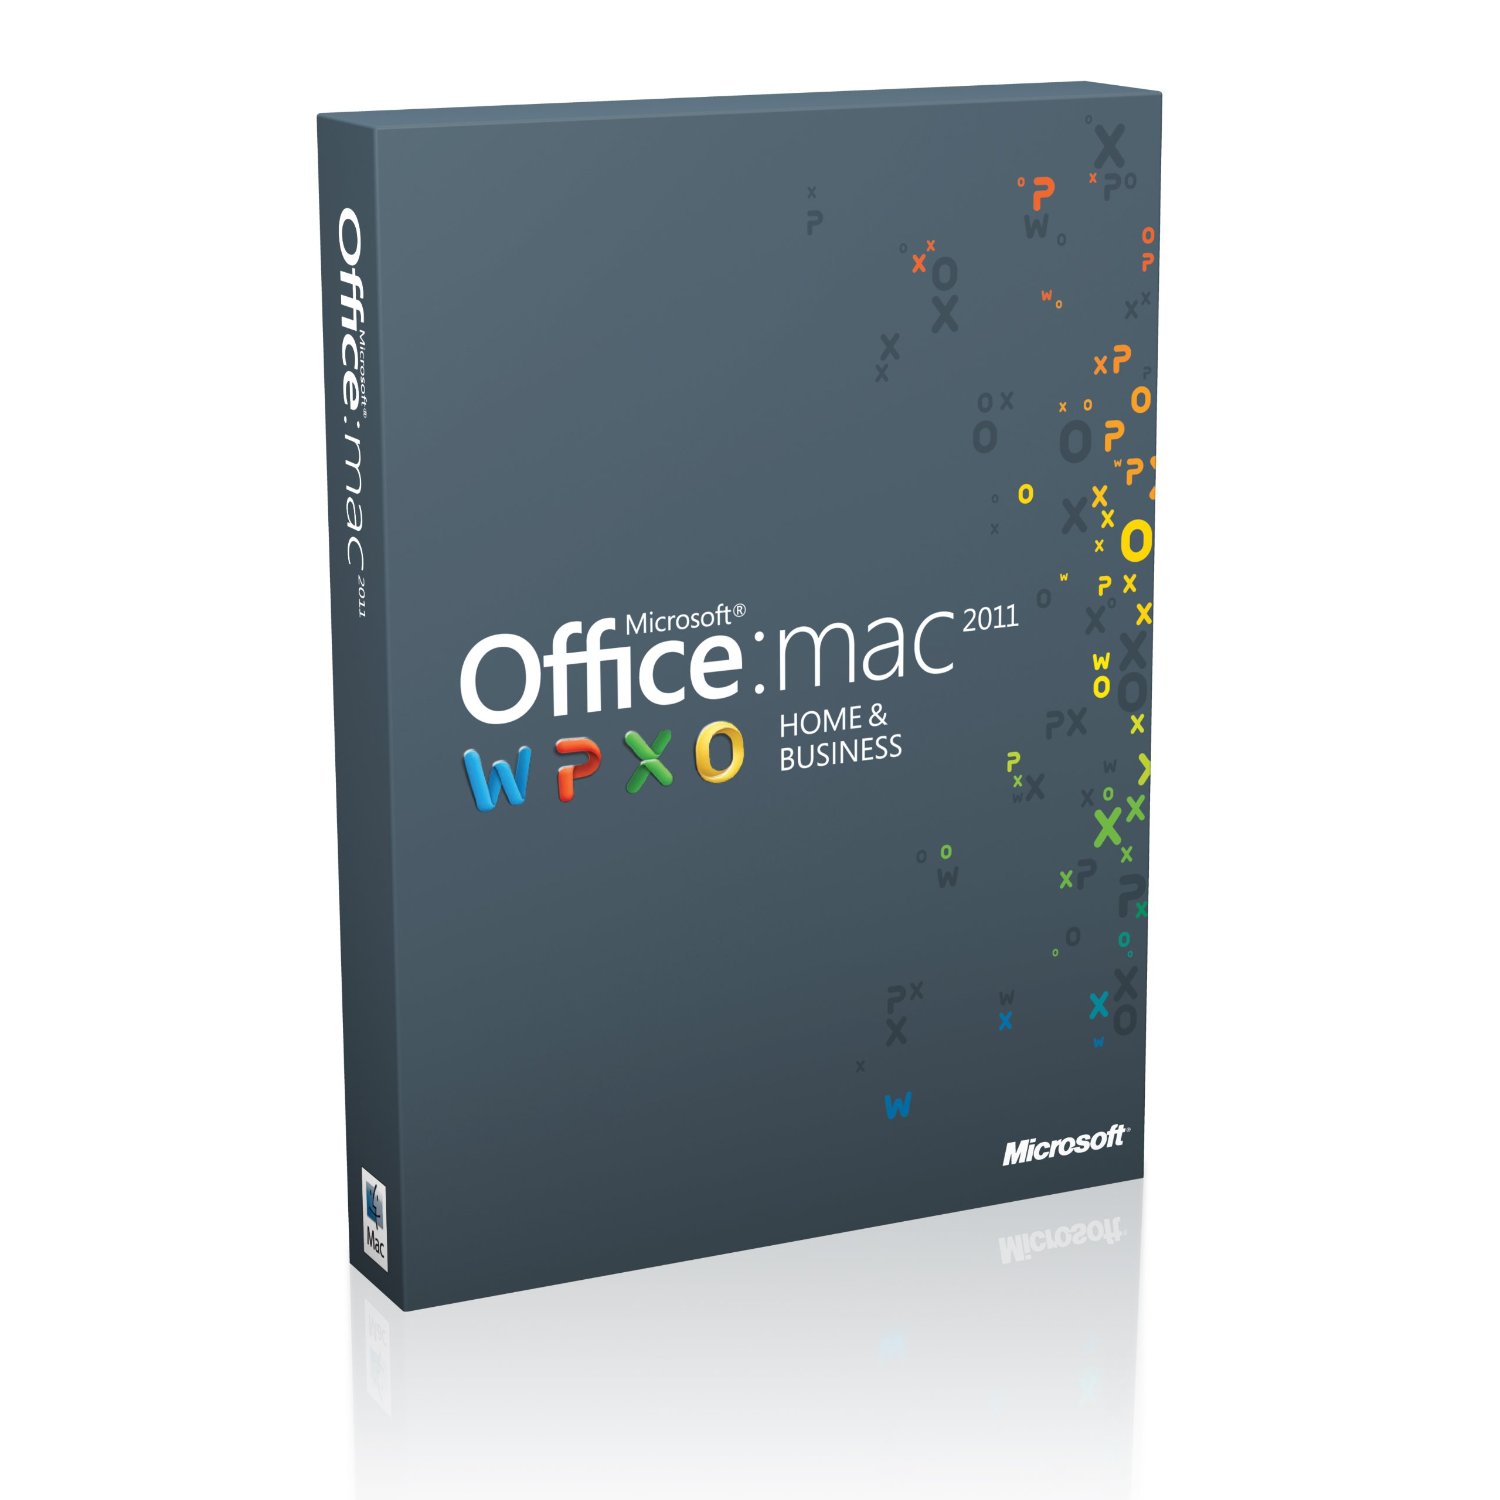 Download office 2011 mac iso